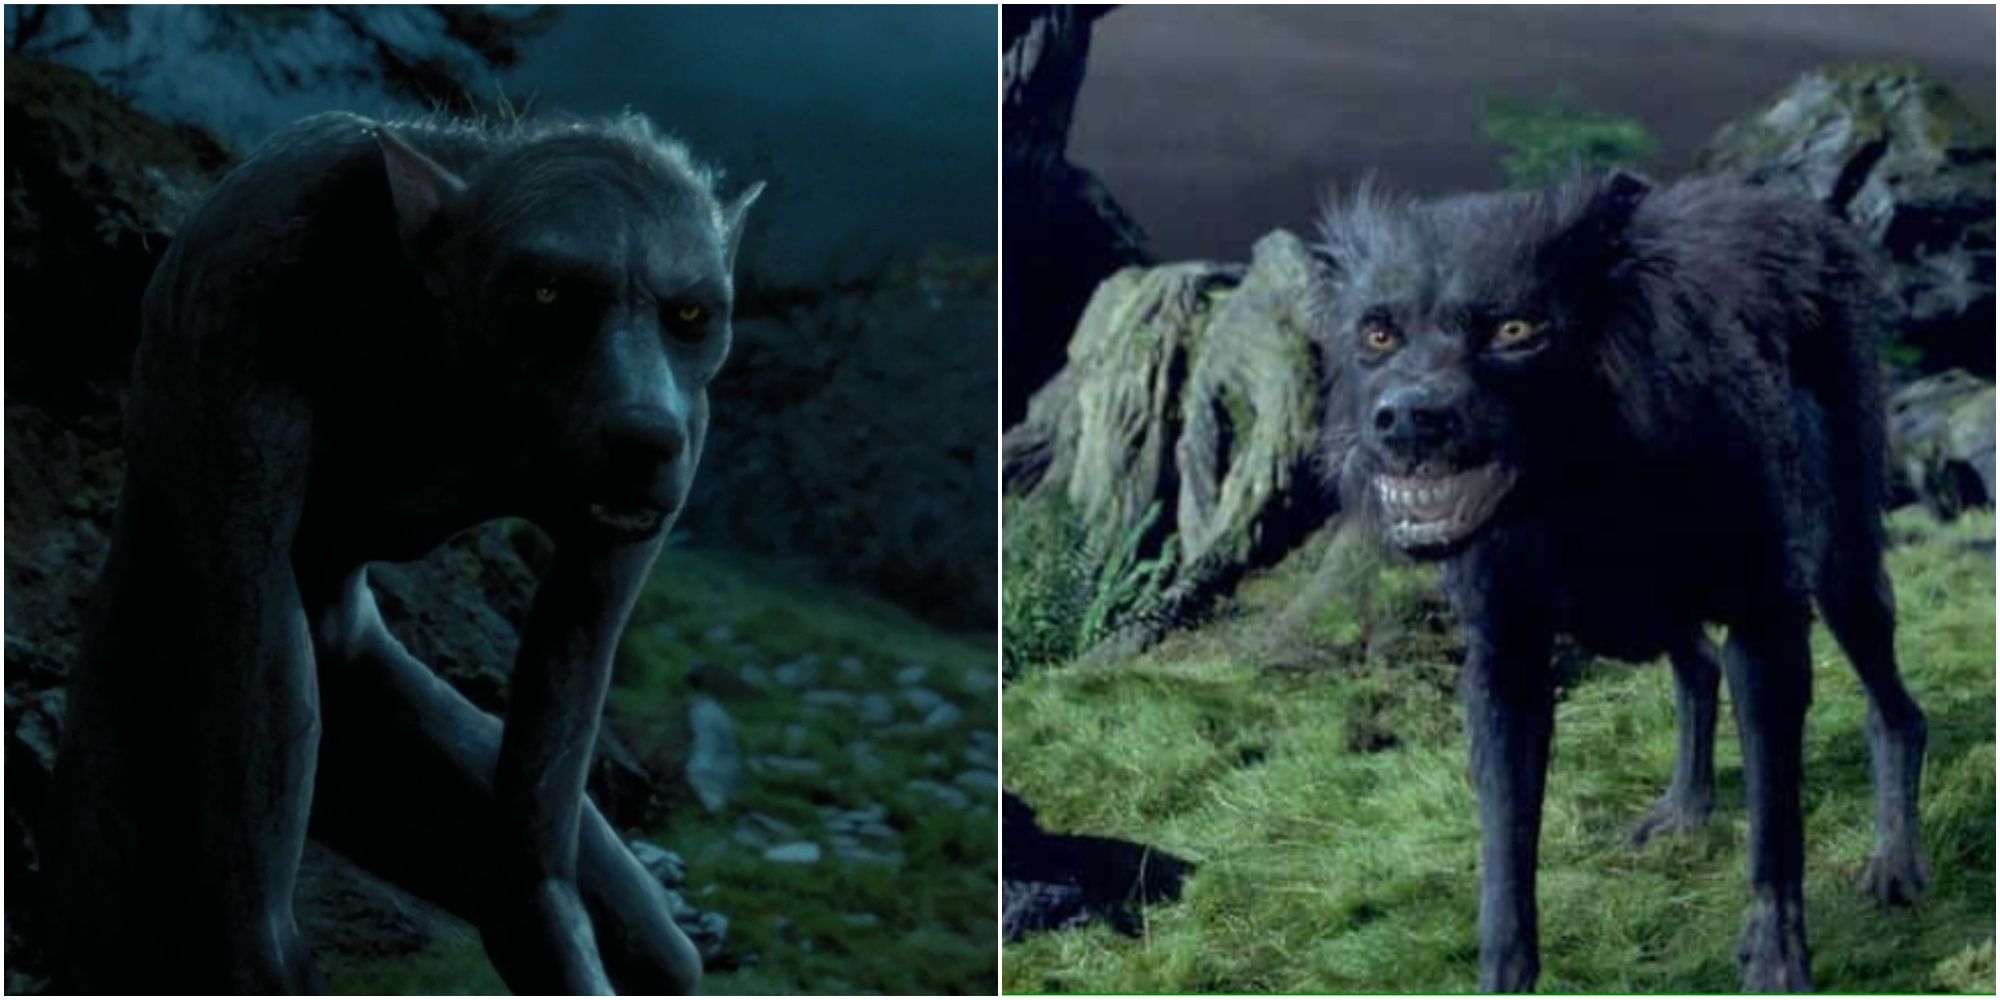 Split image of Remus Lupin's Werewolf transformation and Sirius Black's Animagus form Padfoot.